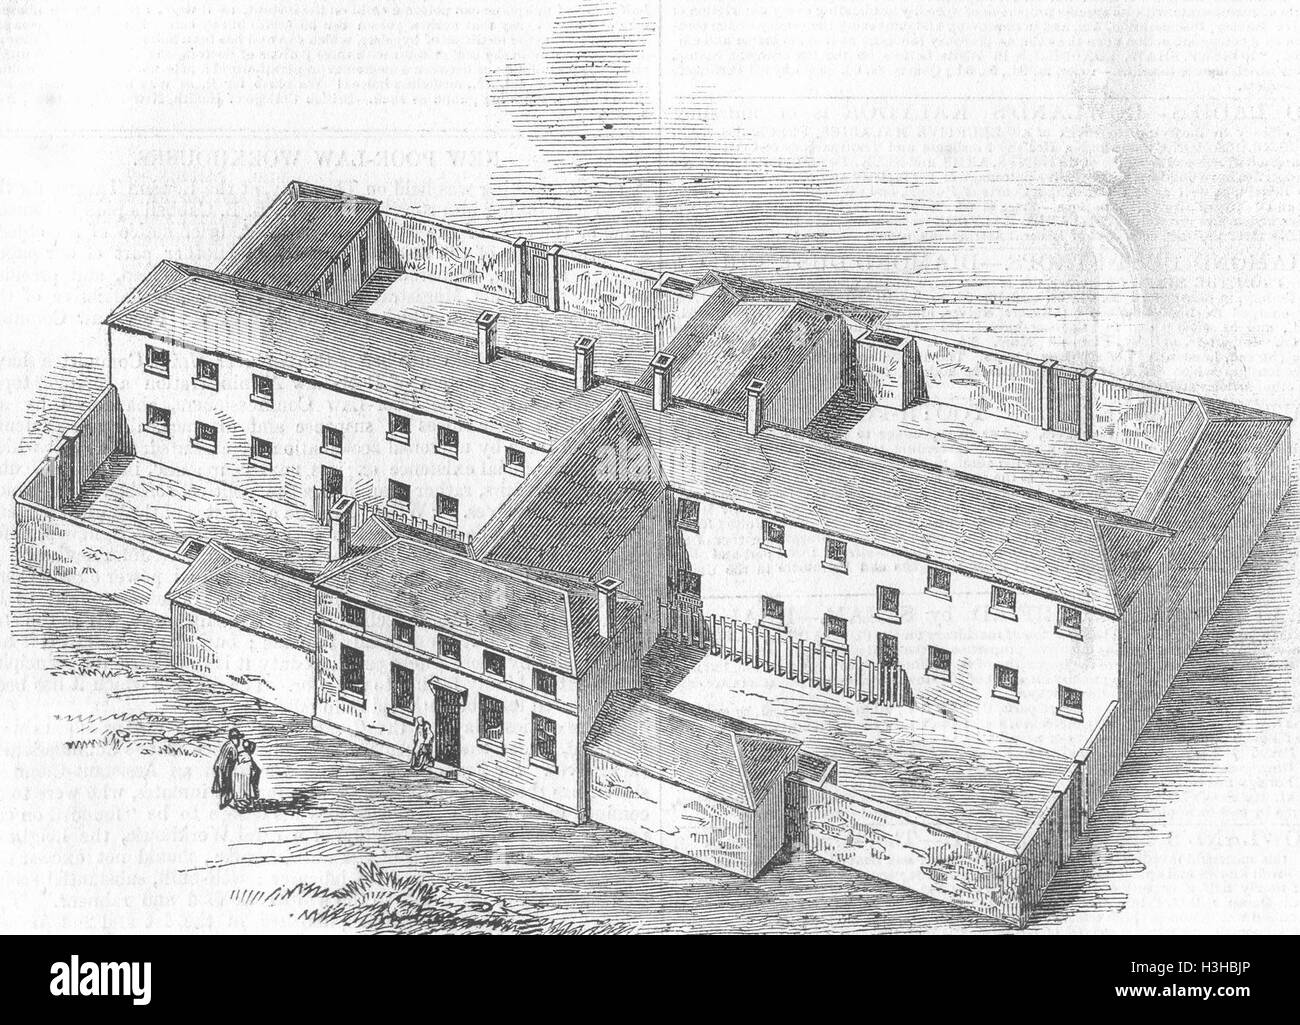 HANTS The Andover Union Workhouse 1846. Illustrated London News Stock Photo